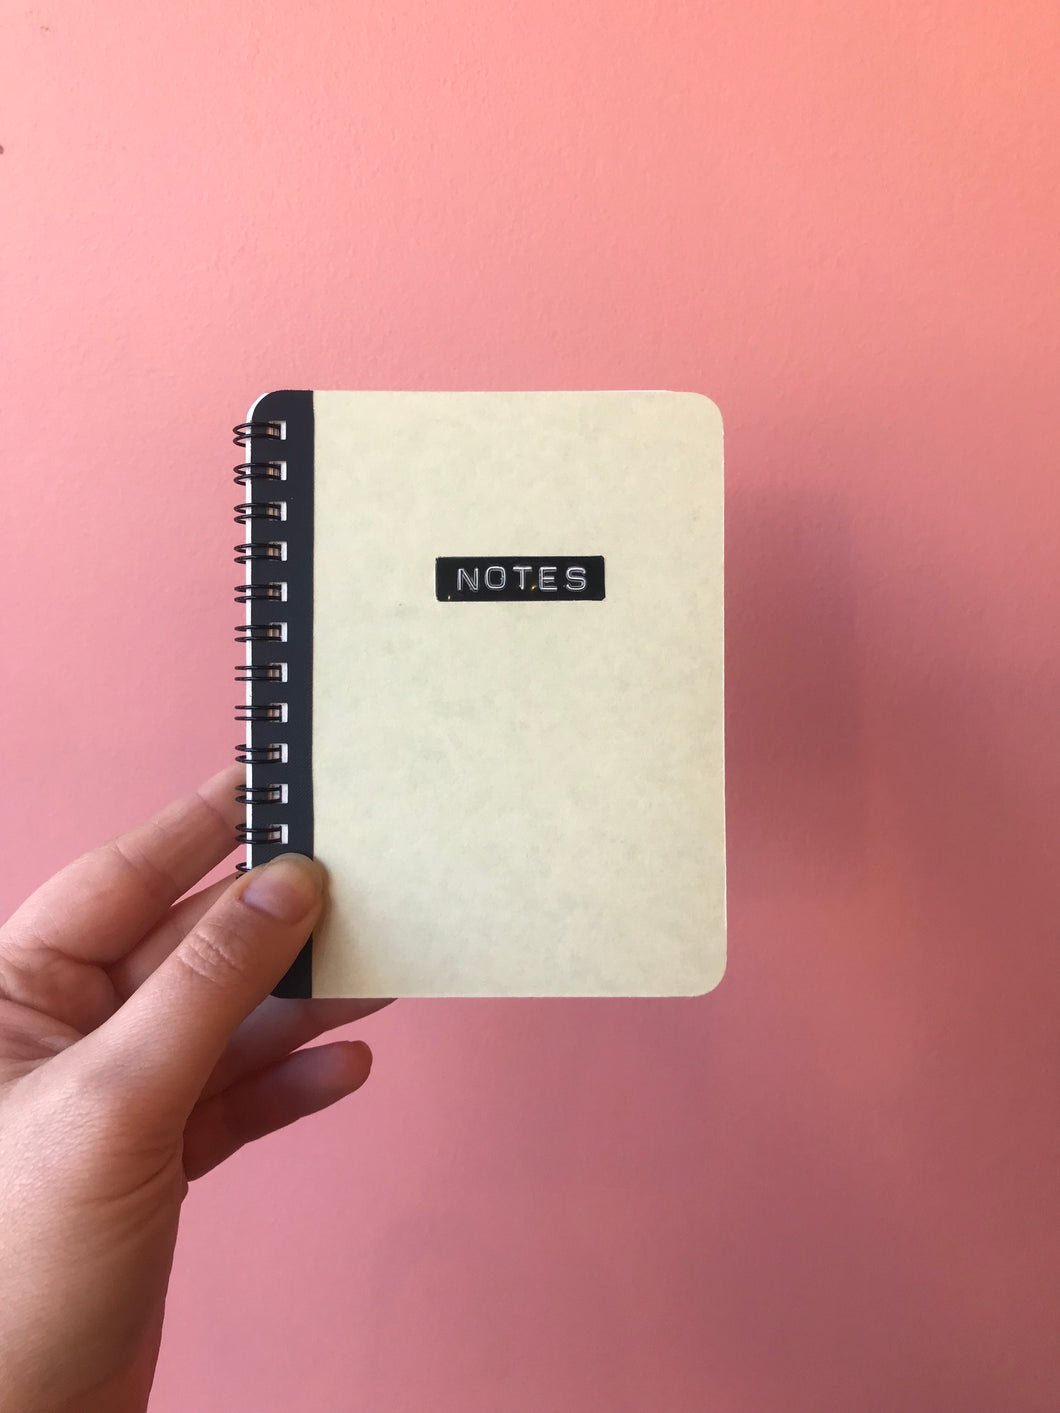 NOTES - handmade rescued notebook